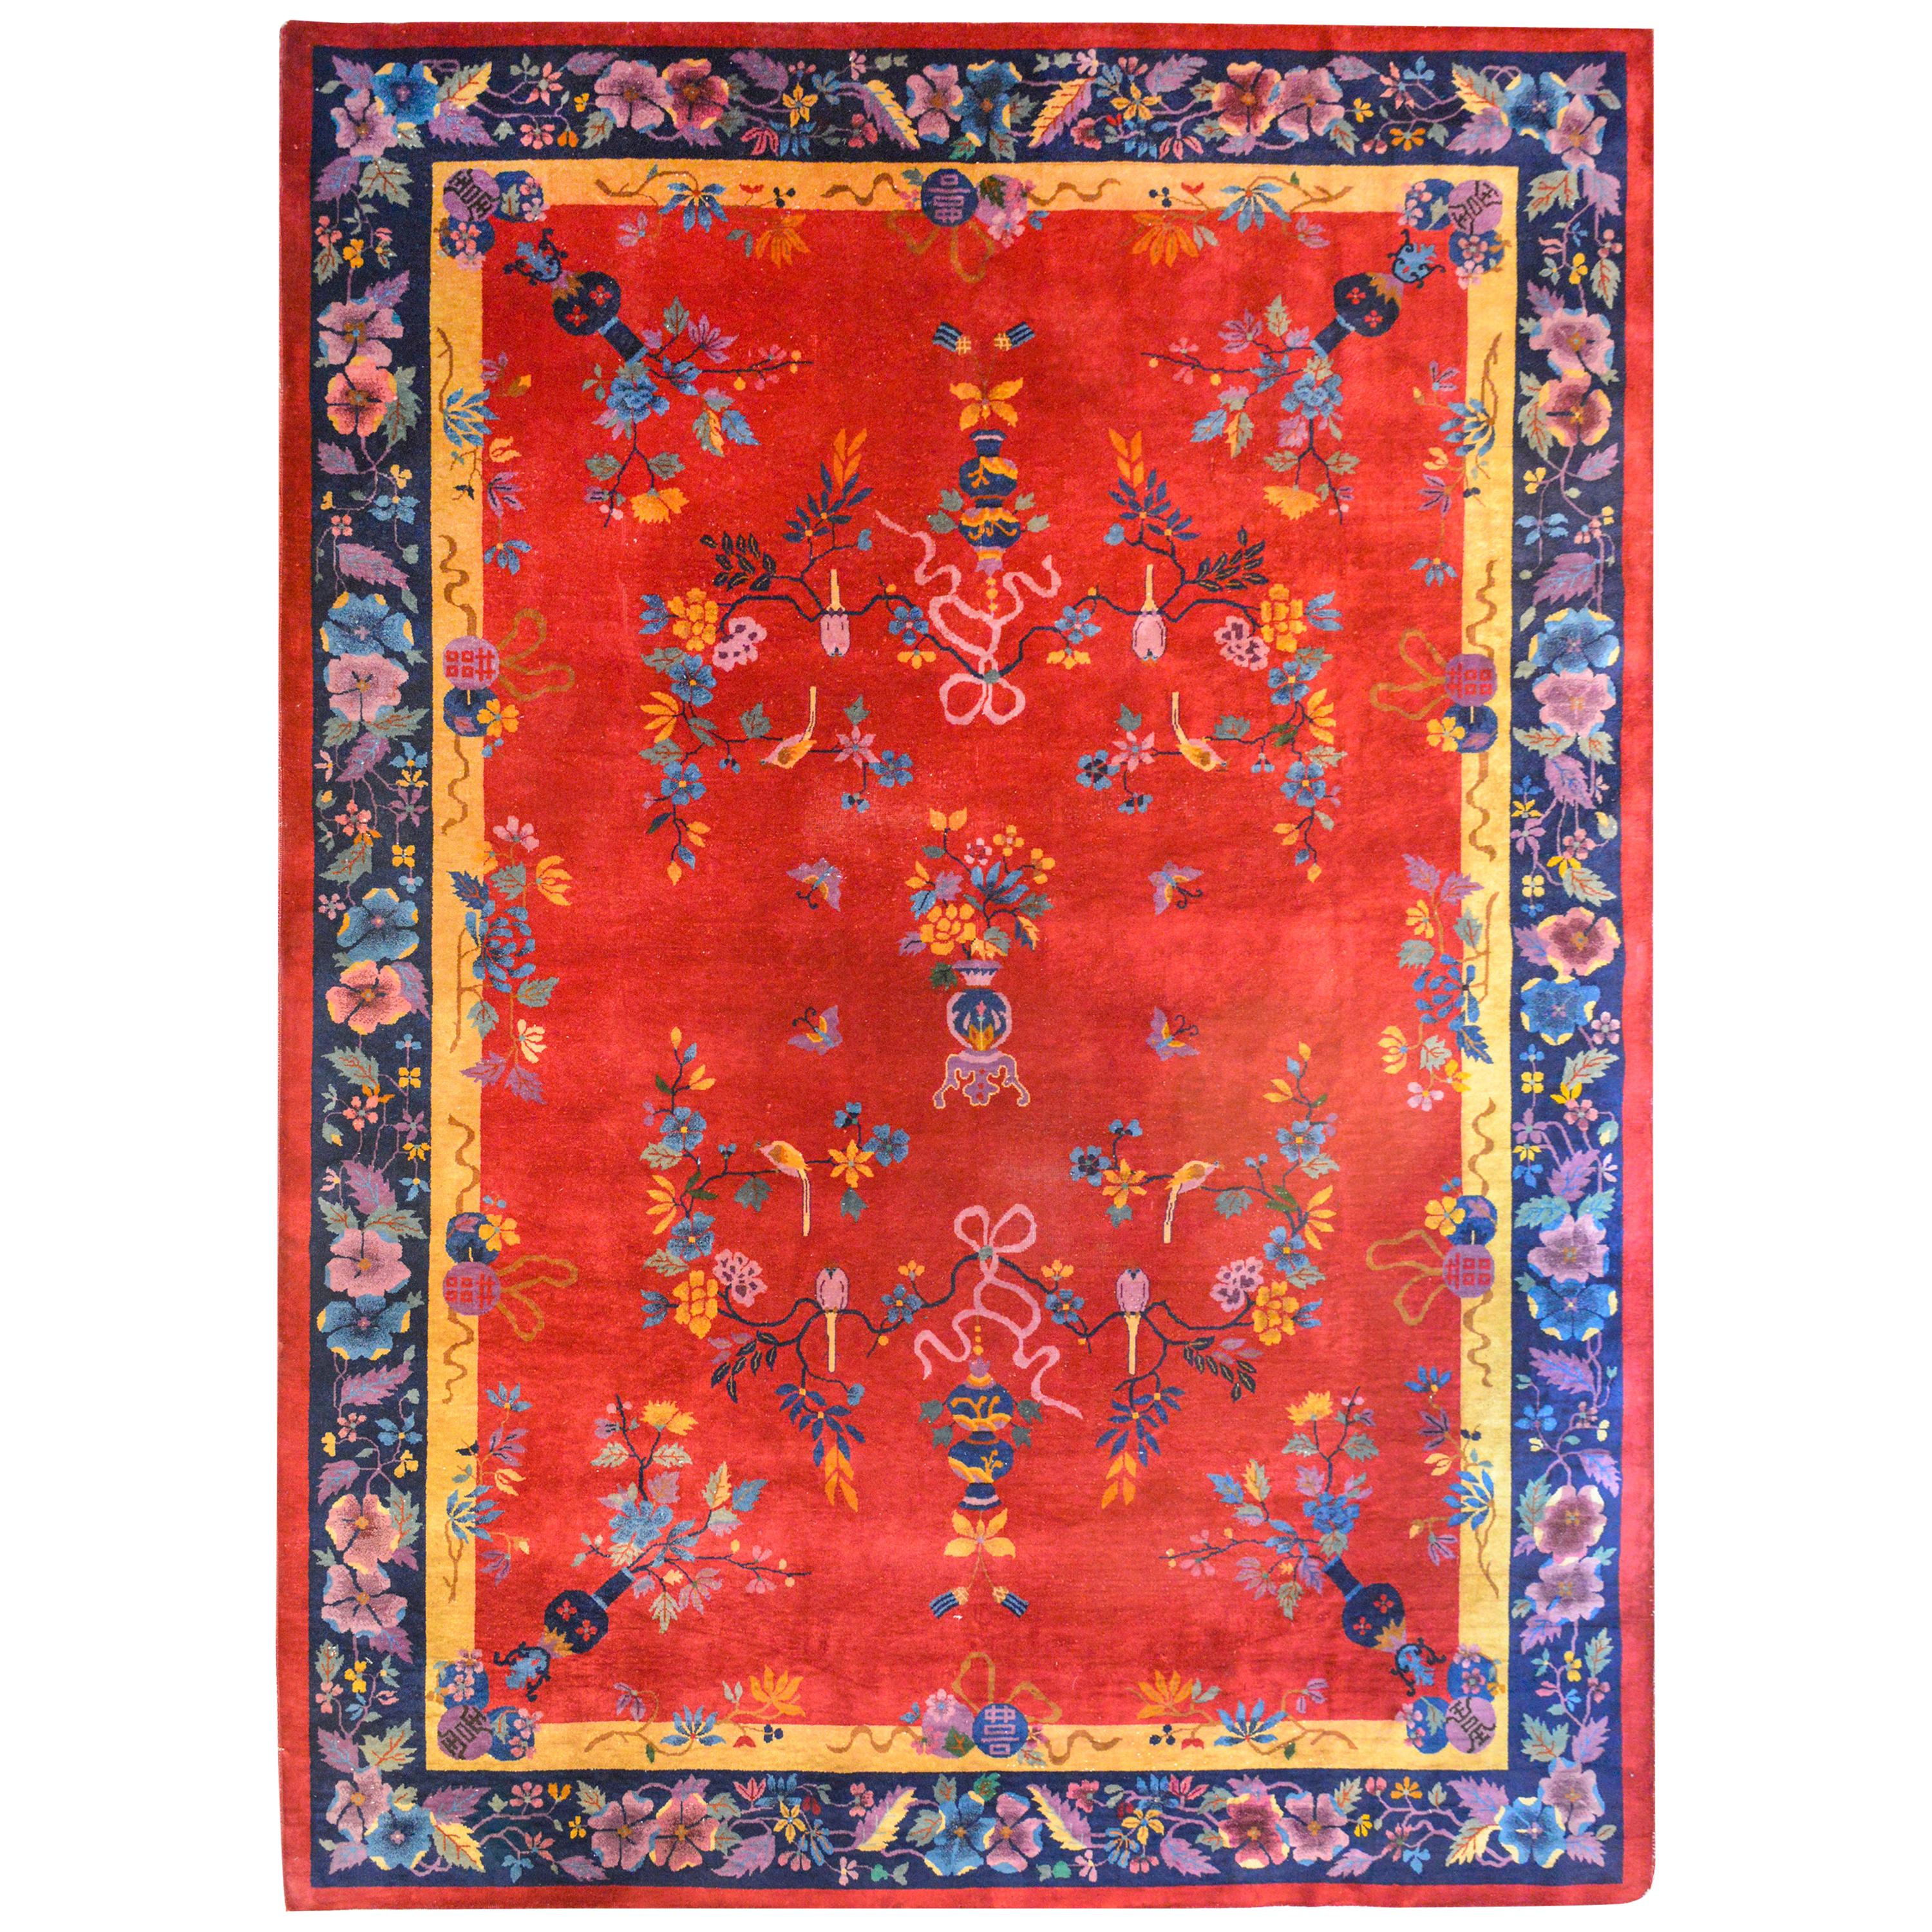 Beautiful Early 20th Century Chinese Art Deco Rug